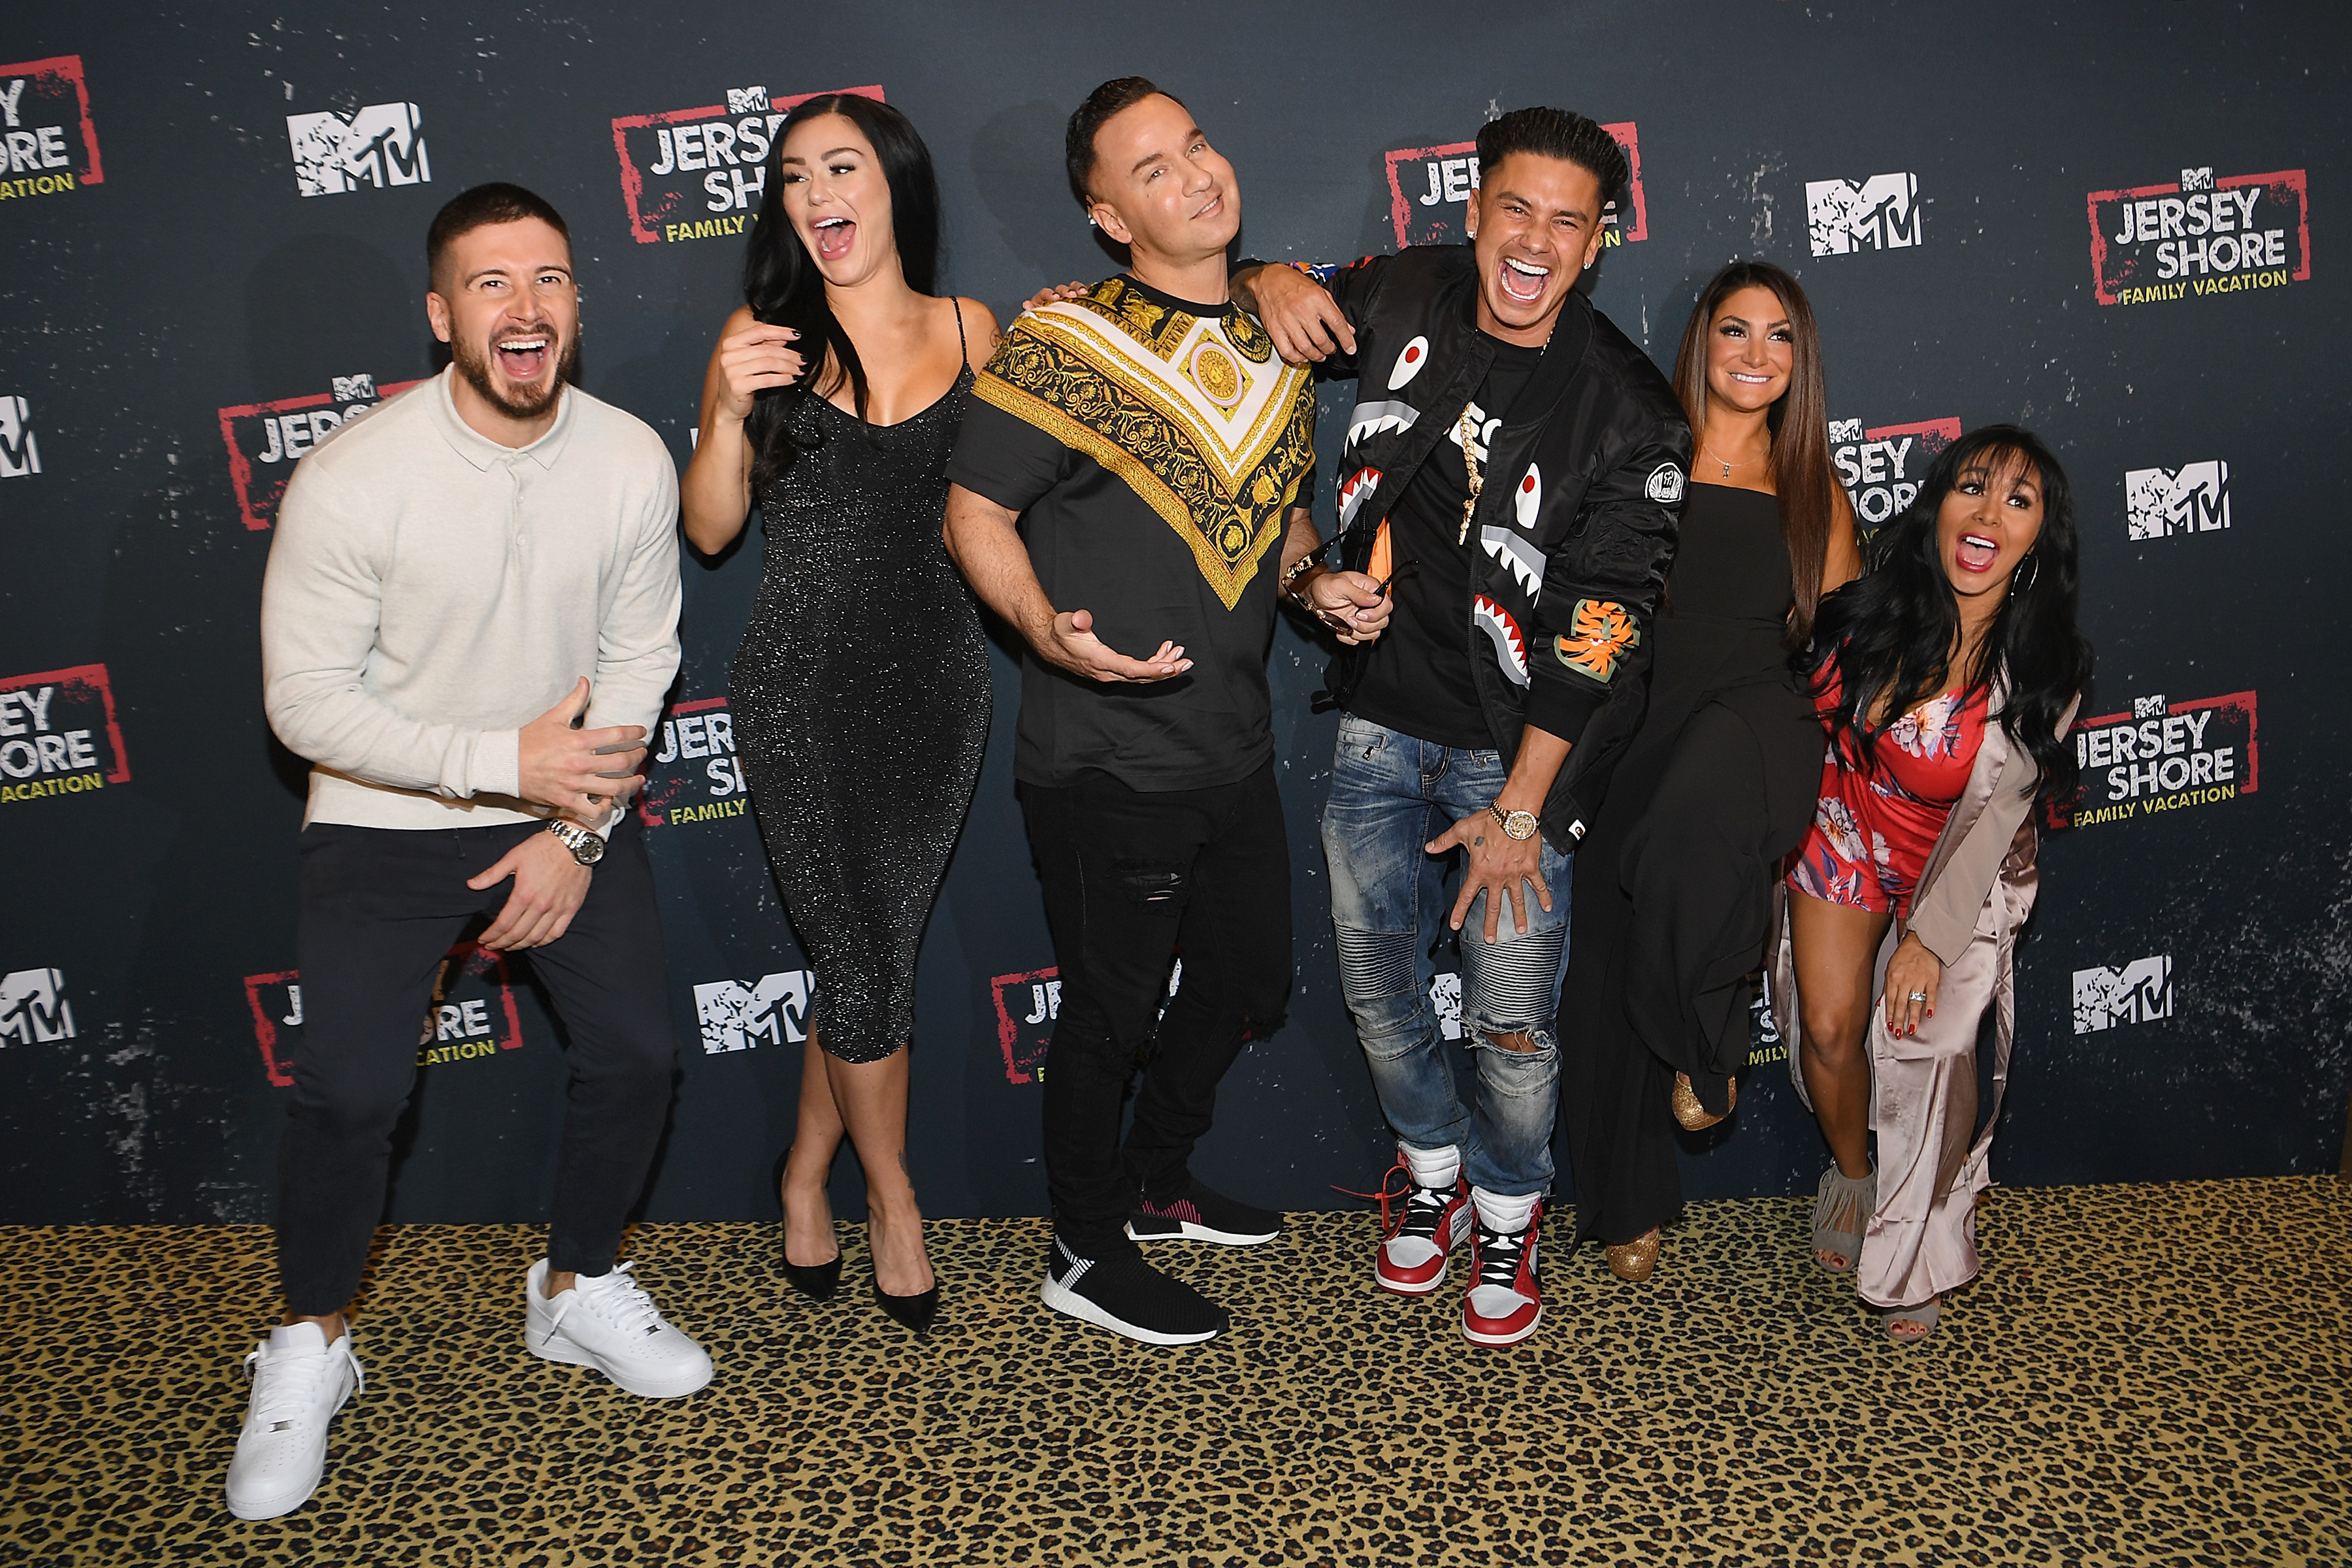 Vinny Guadagnino, Jenni 'JWoww' Farley, Mike 'The Situation' Sorrentino, Paul 'Pauly D' DelVecchio, Deena Cortese and Nicole 'Snooki' Polizzi from 'Jersey Shore'